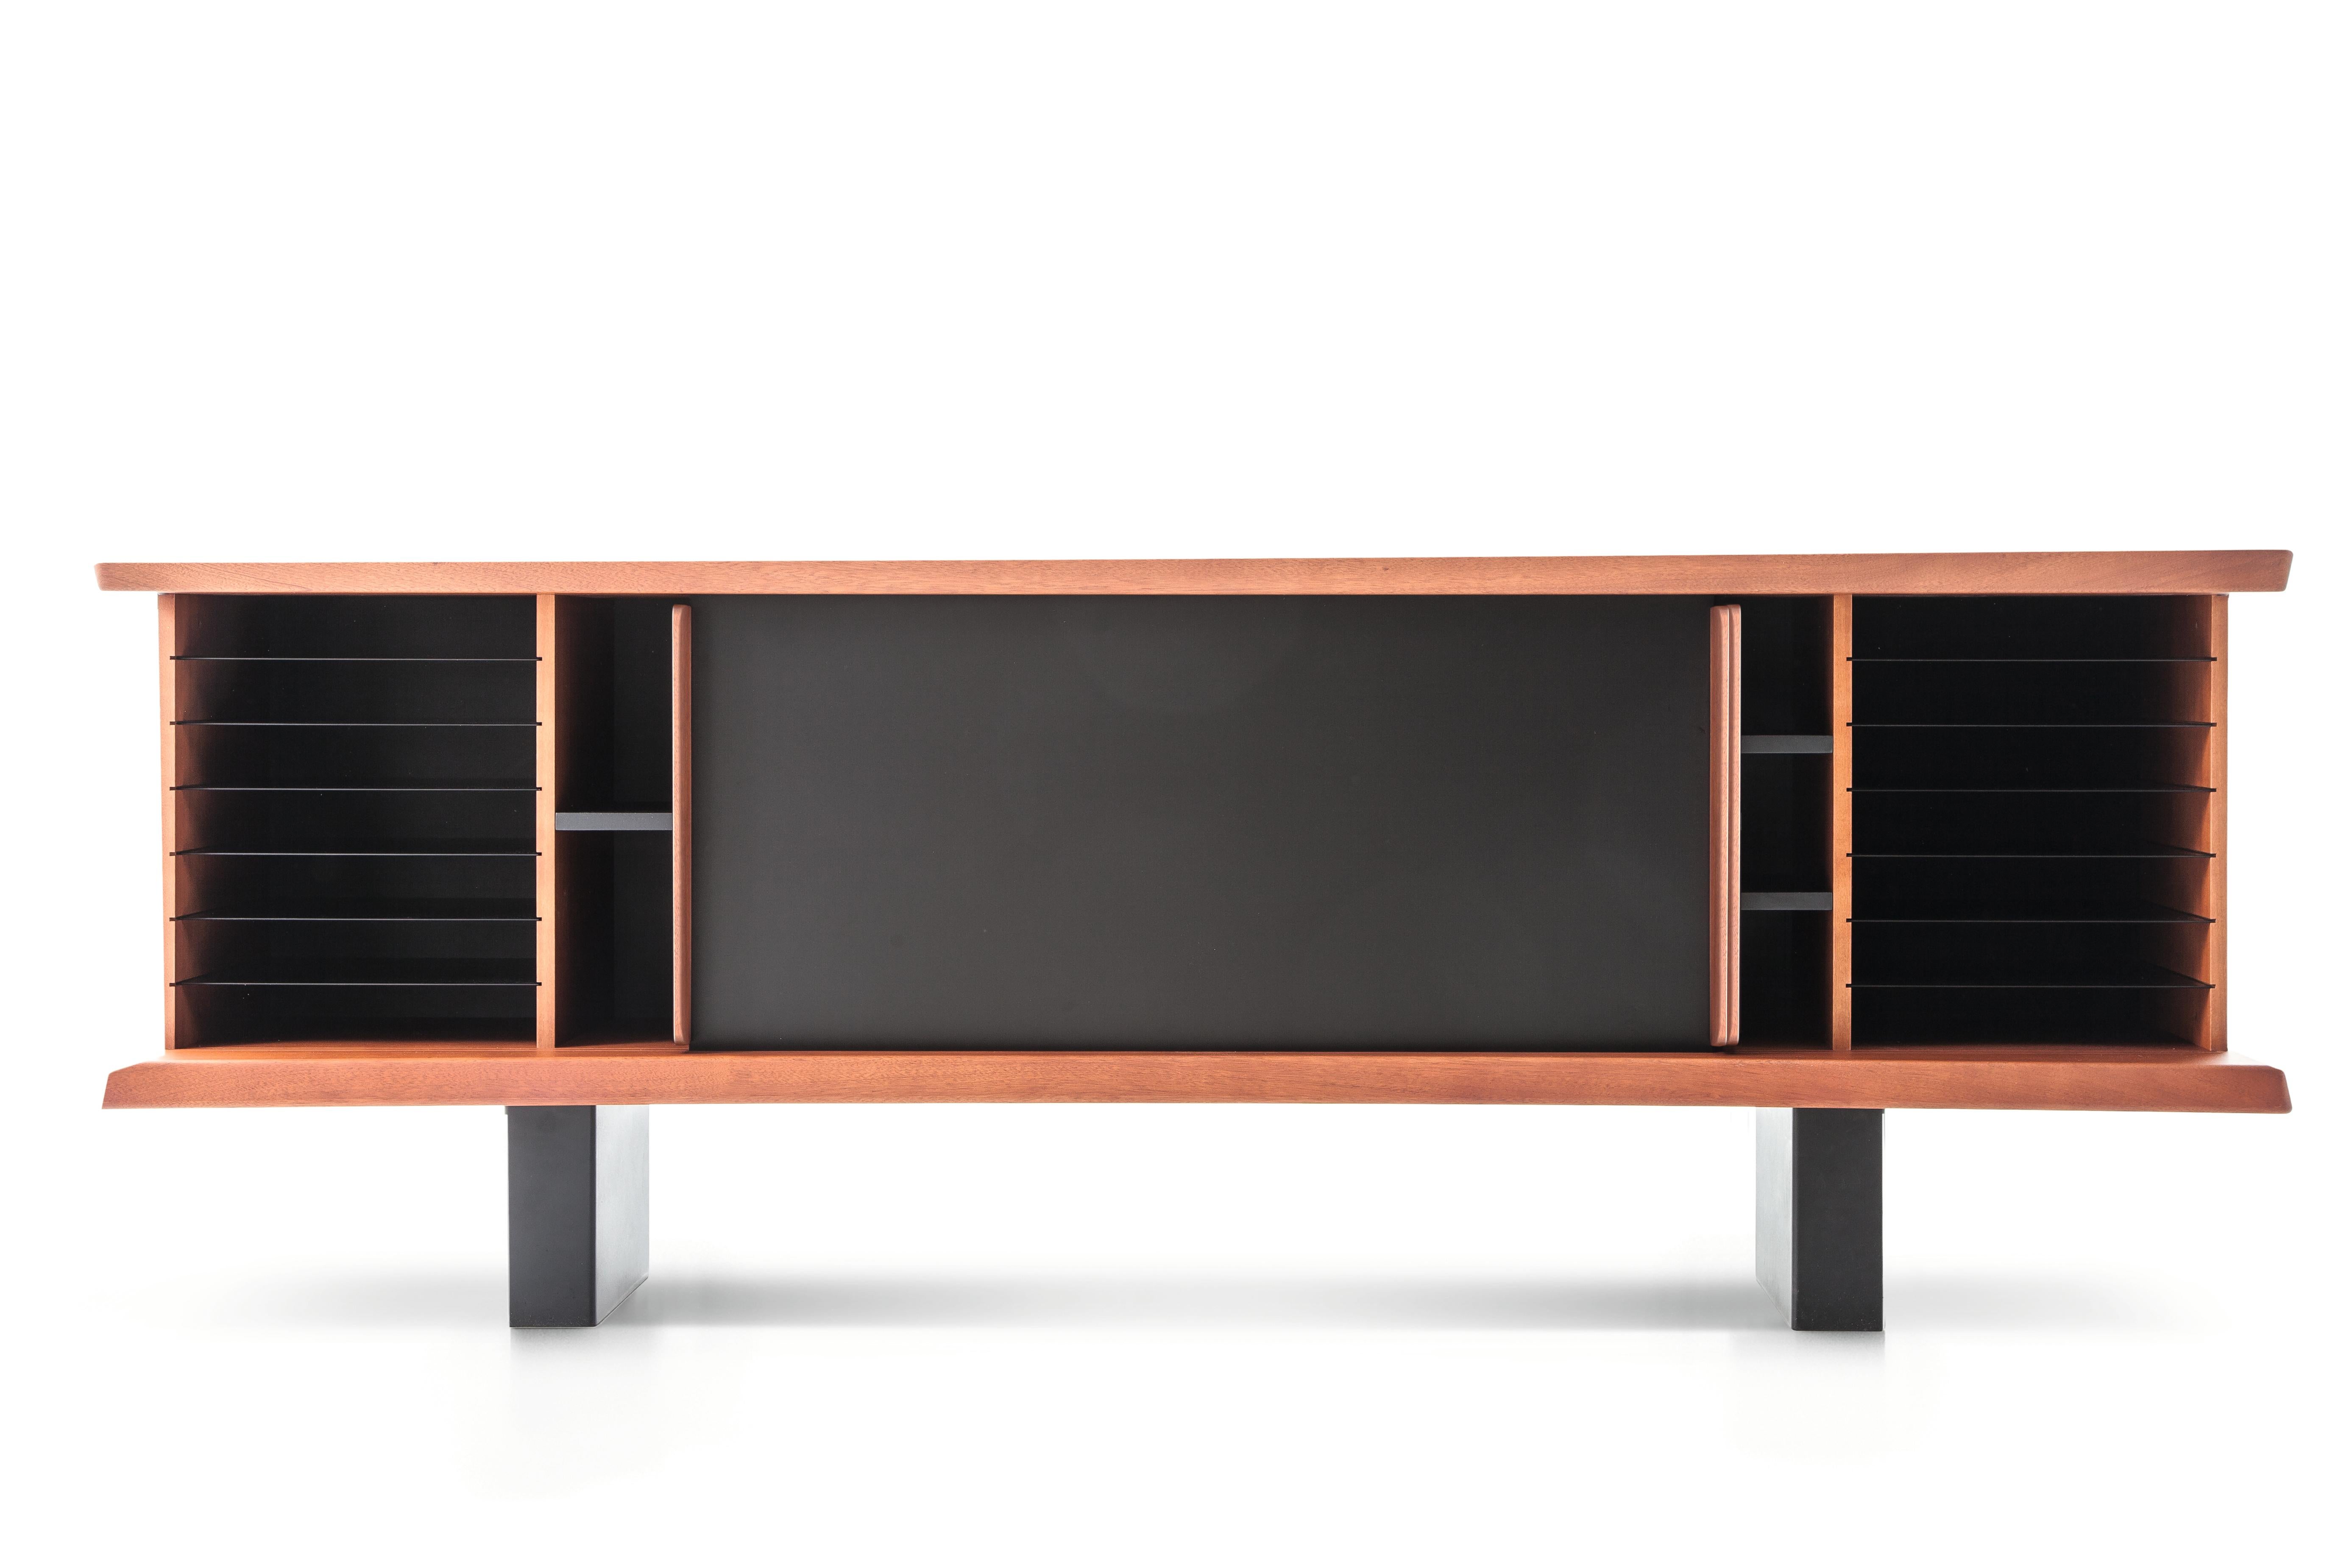 The Charlotte Perriand 513 Riflesso storage unit, reissued by Cassina, is a true work of art that reflects the designer's impeccable taste and sense of style. Originally designed in 1939, this piece has been reissued since 2014 and continues to